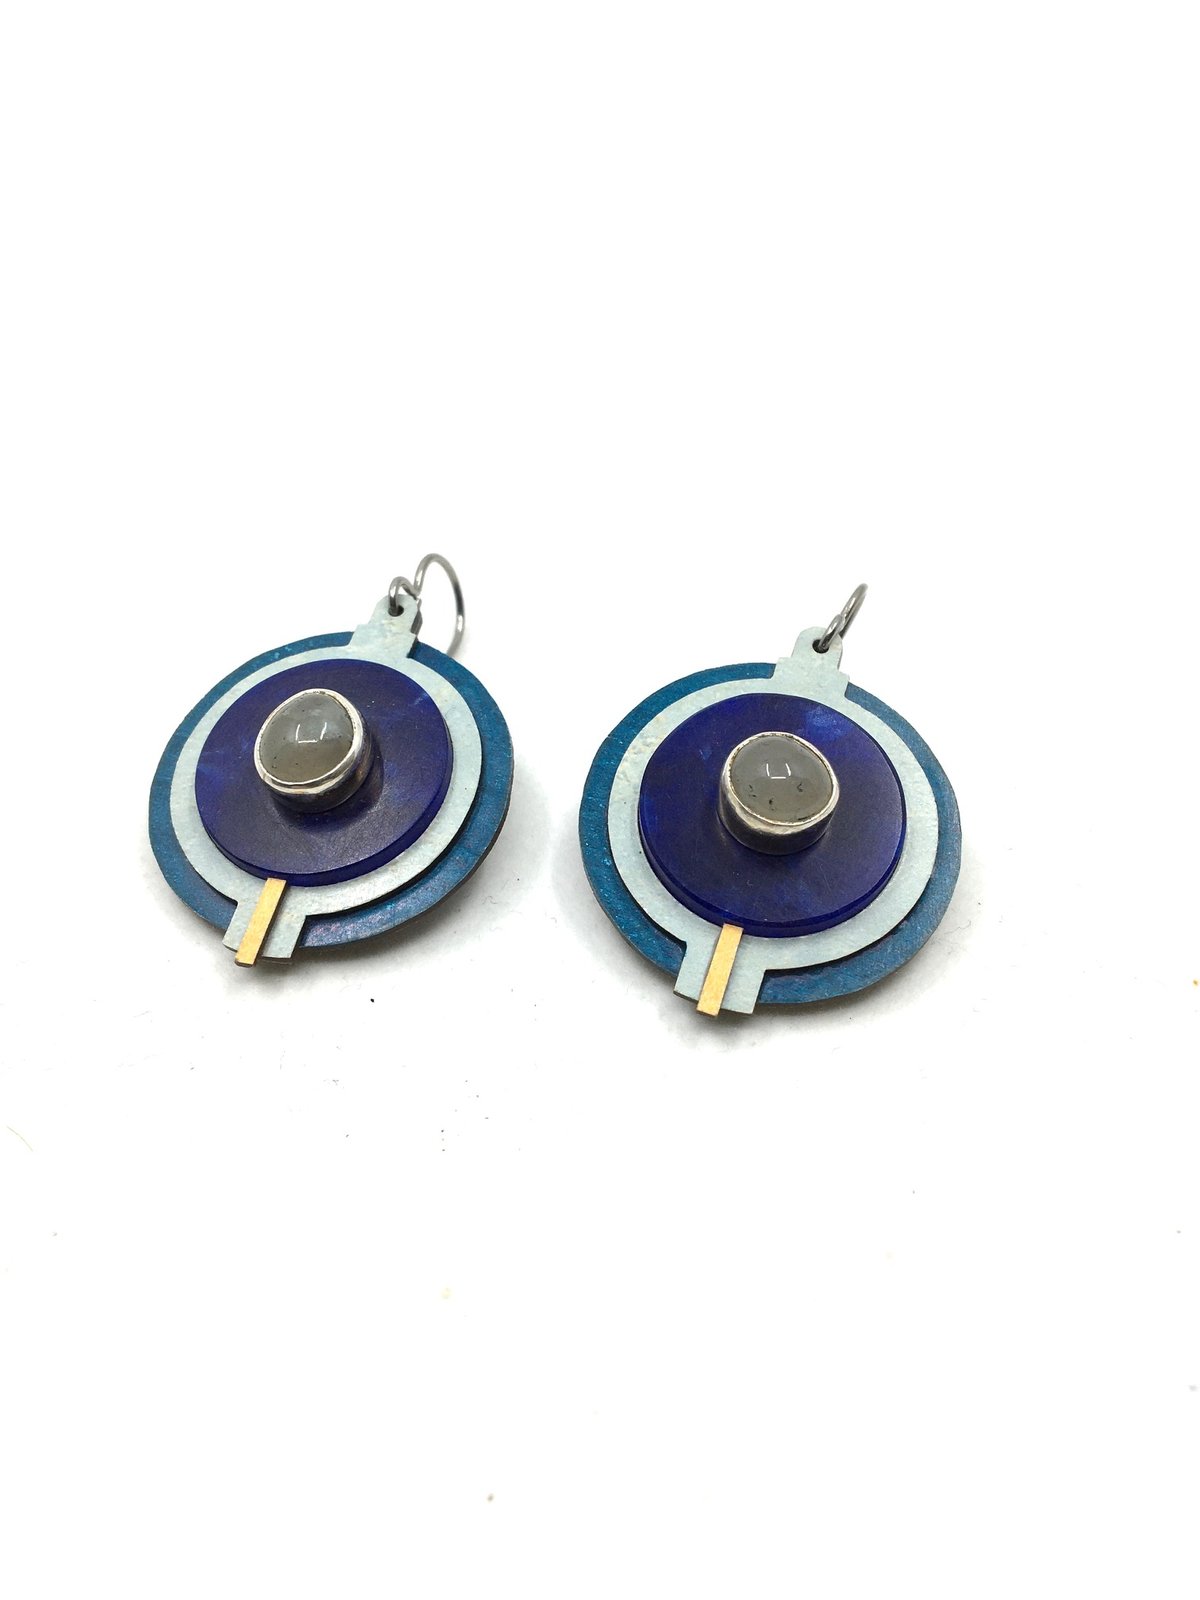 Concentric Circle Earrings by Michael Gleason